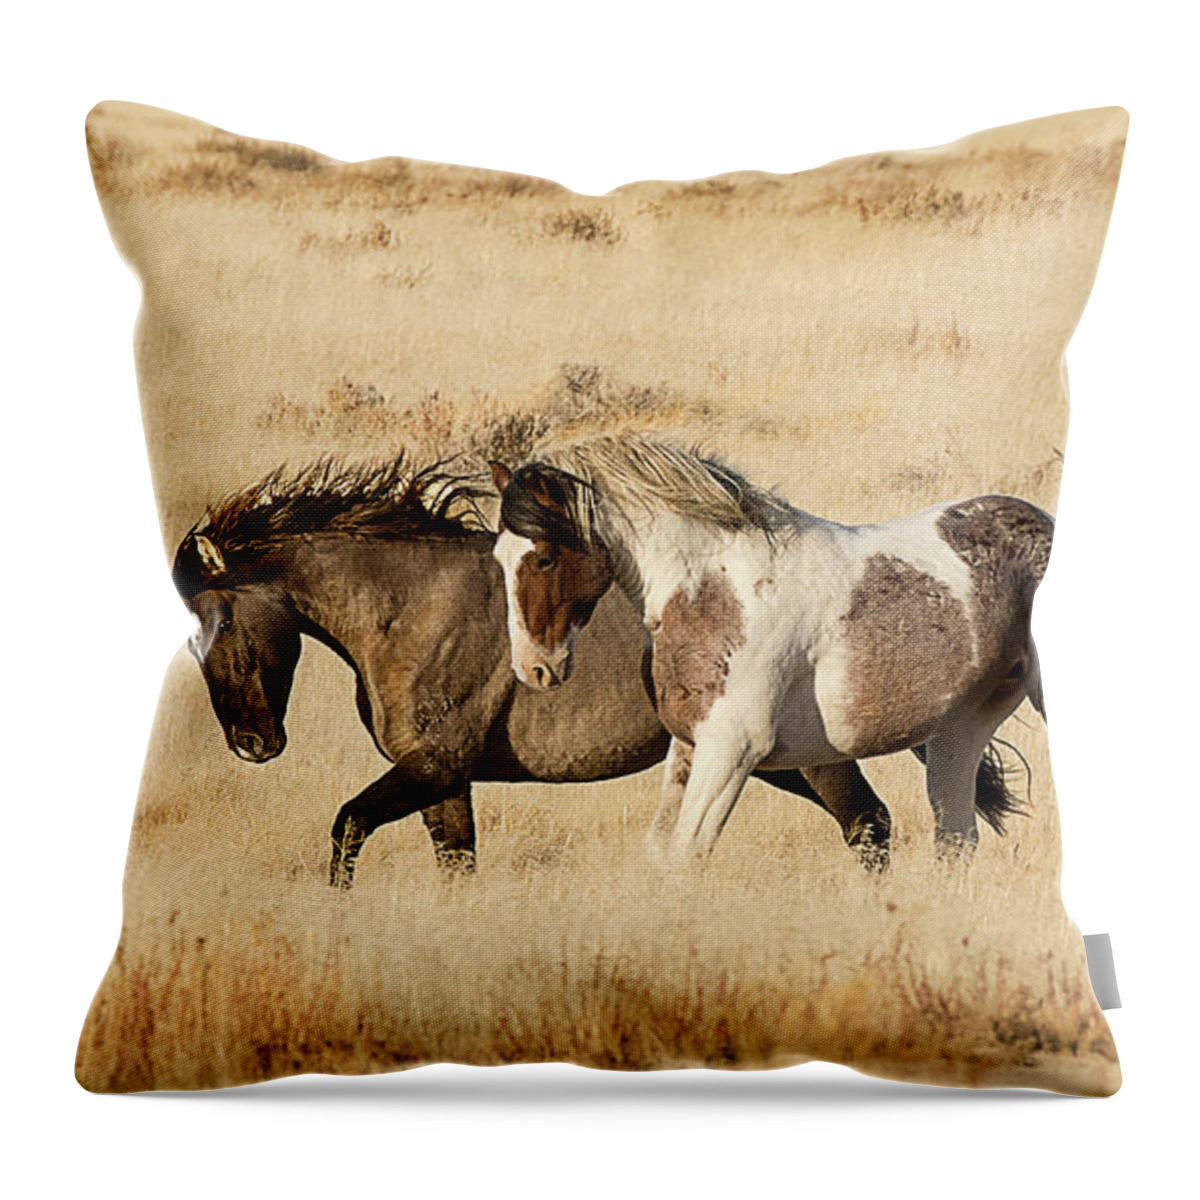 Mammal Throw Pillow featuring the photograph Posturing at Dawn by Dennis Hammer